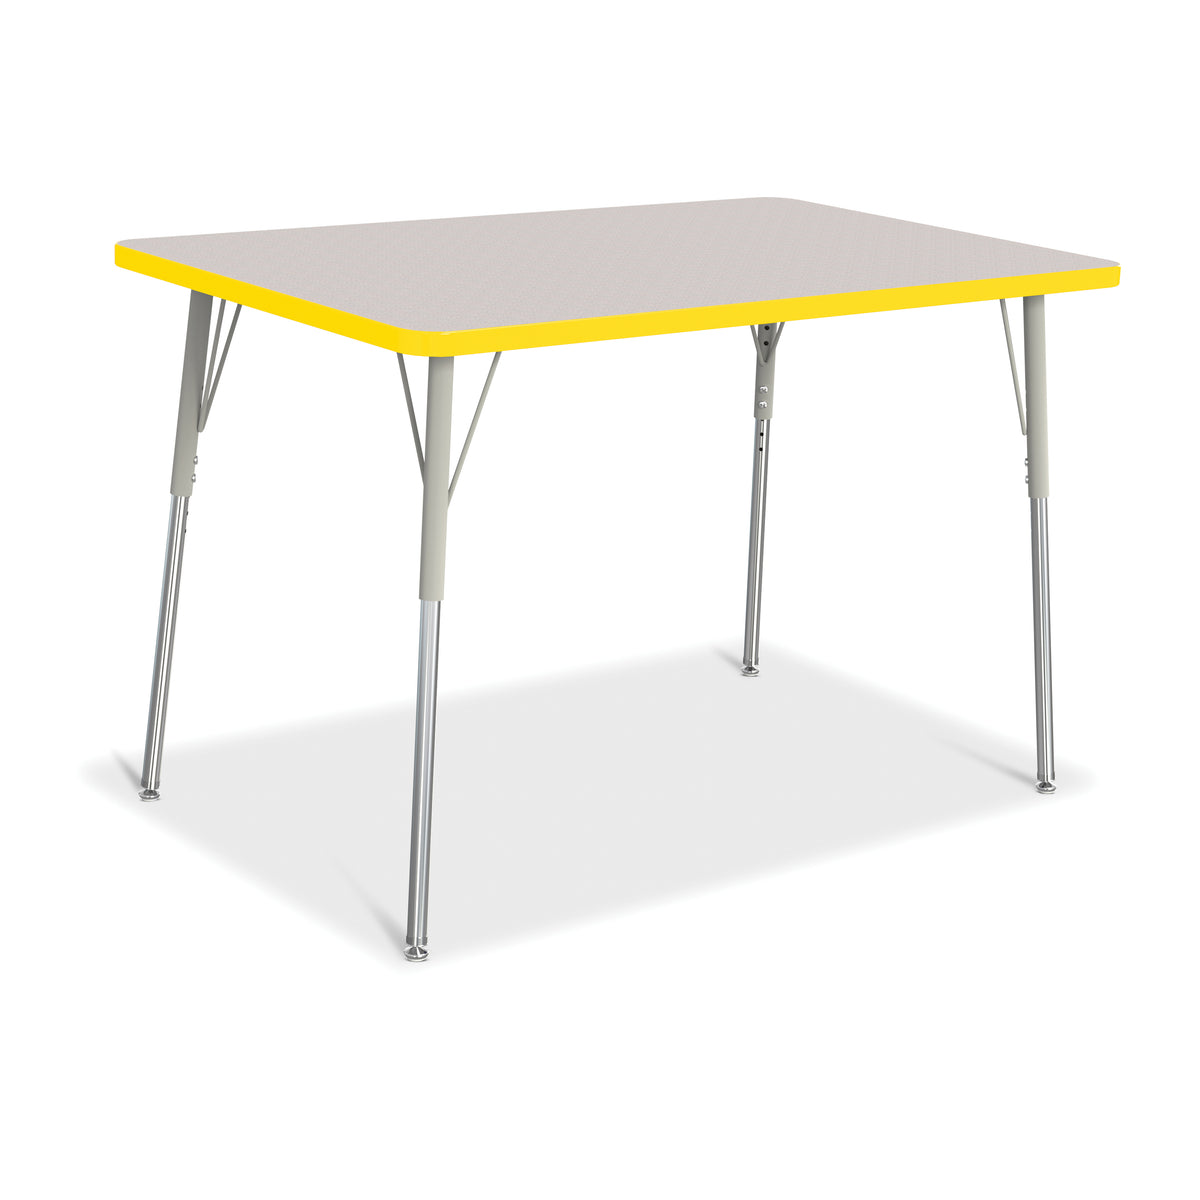 6473JCA007, Berries Rectangle Activity Table - 30" X 48", A-height - Freckled Gray/Yellow/Gray